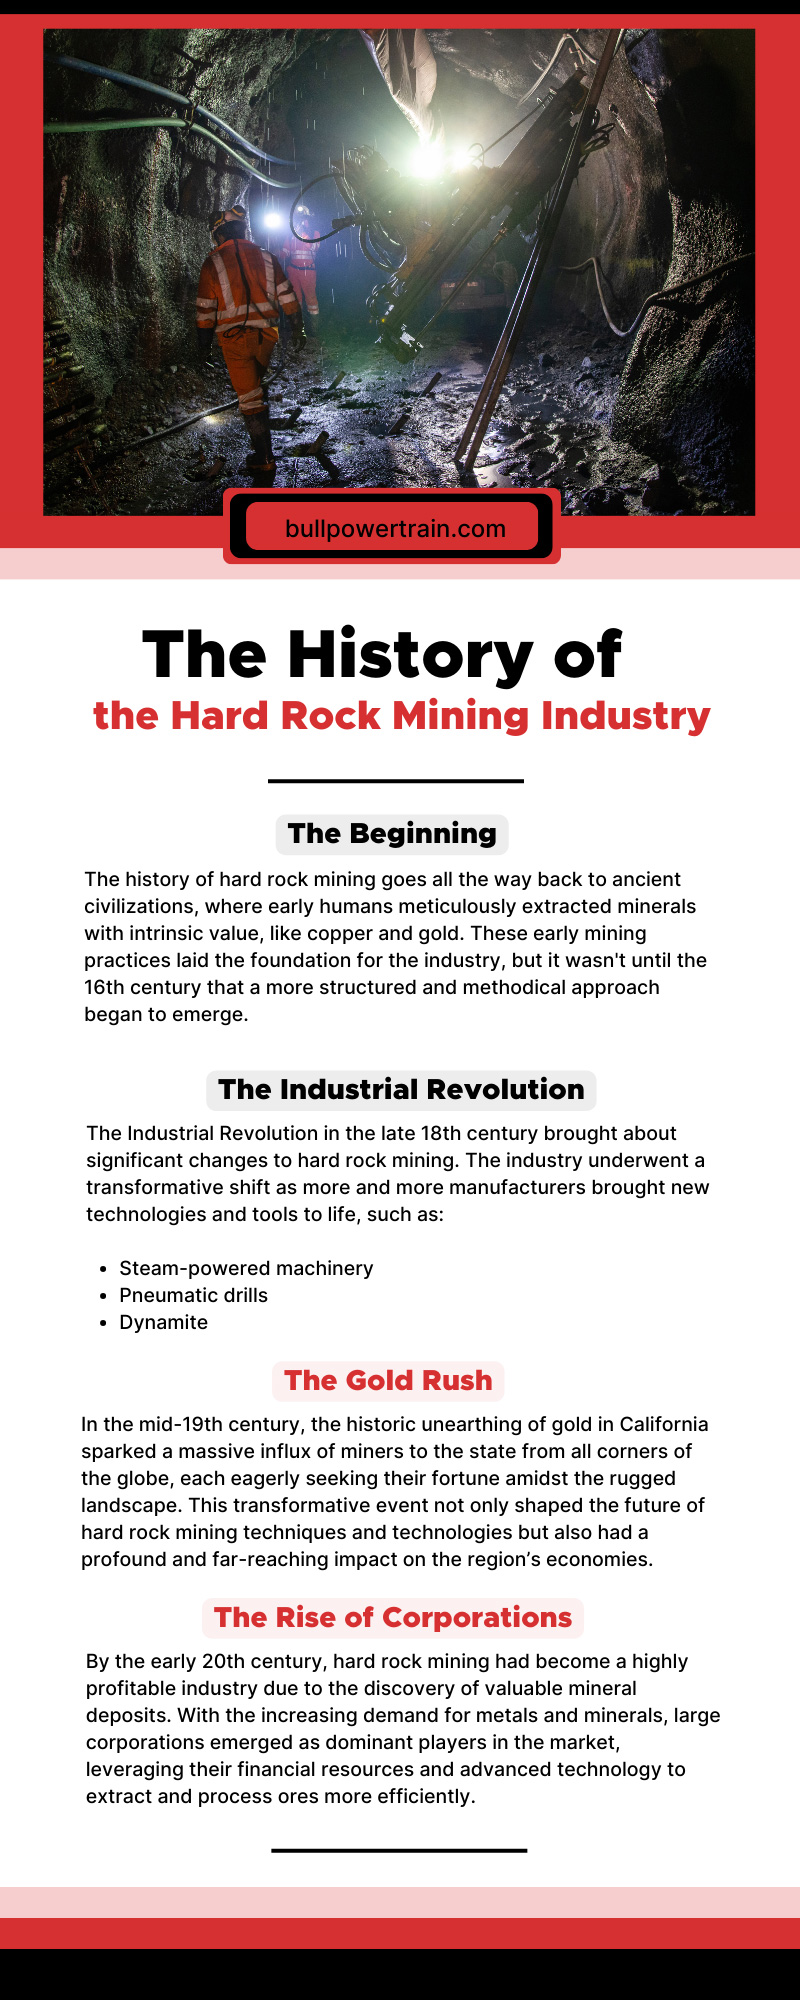 The History of the Hard Rock Mining Industry